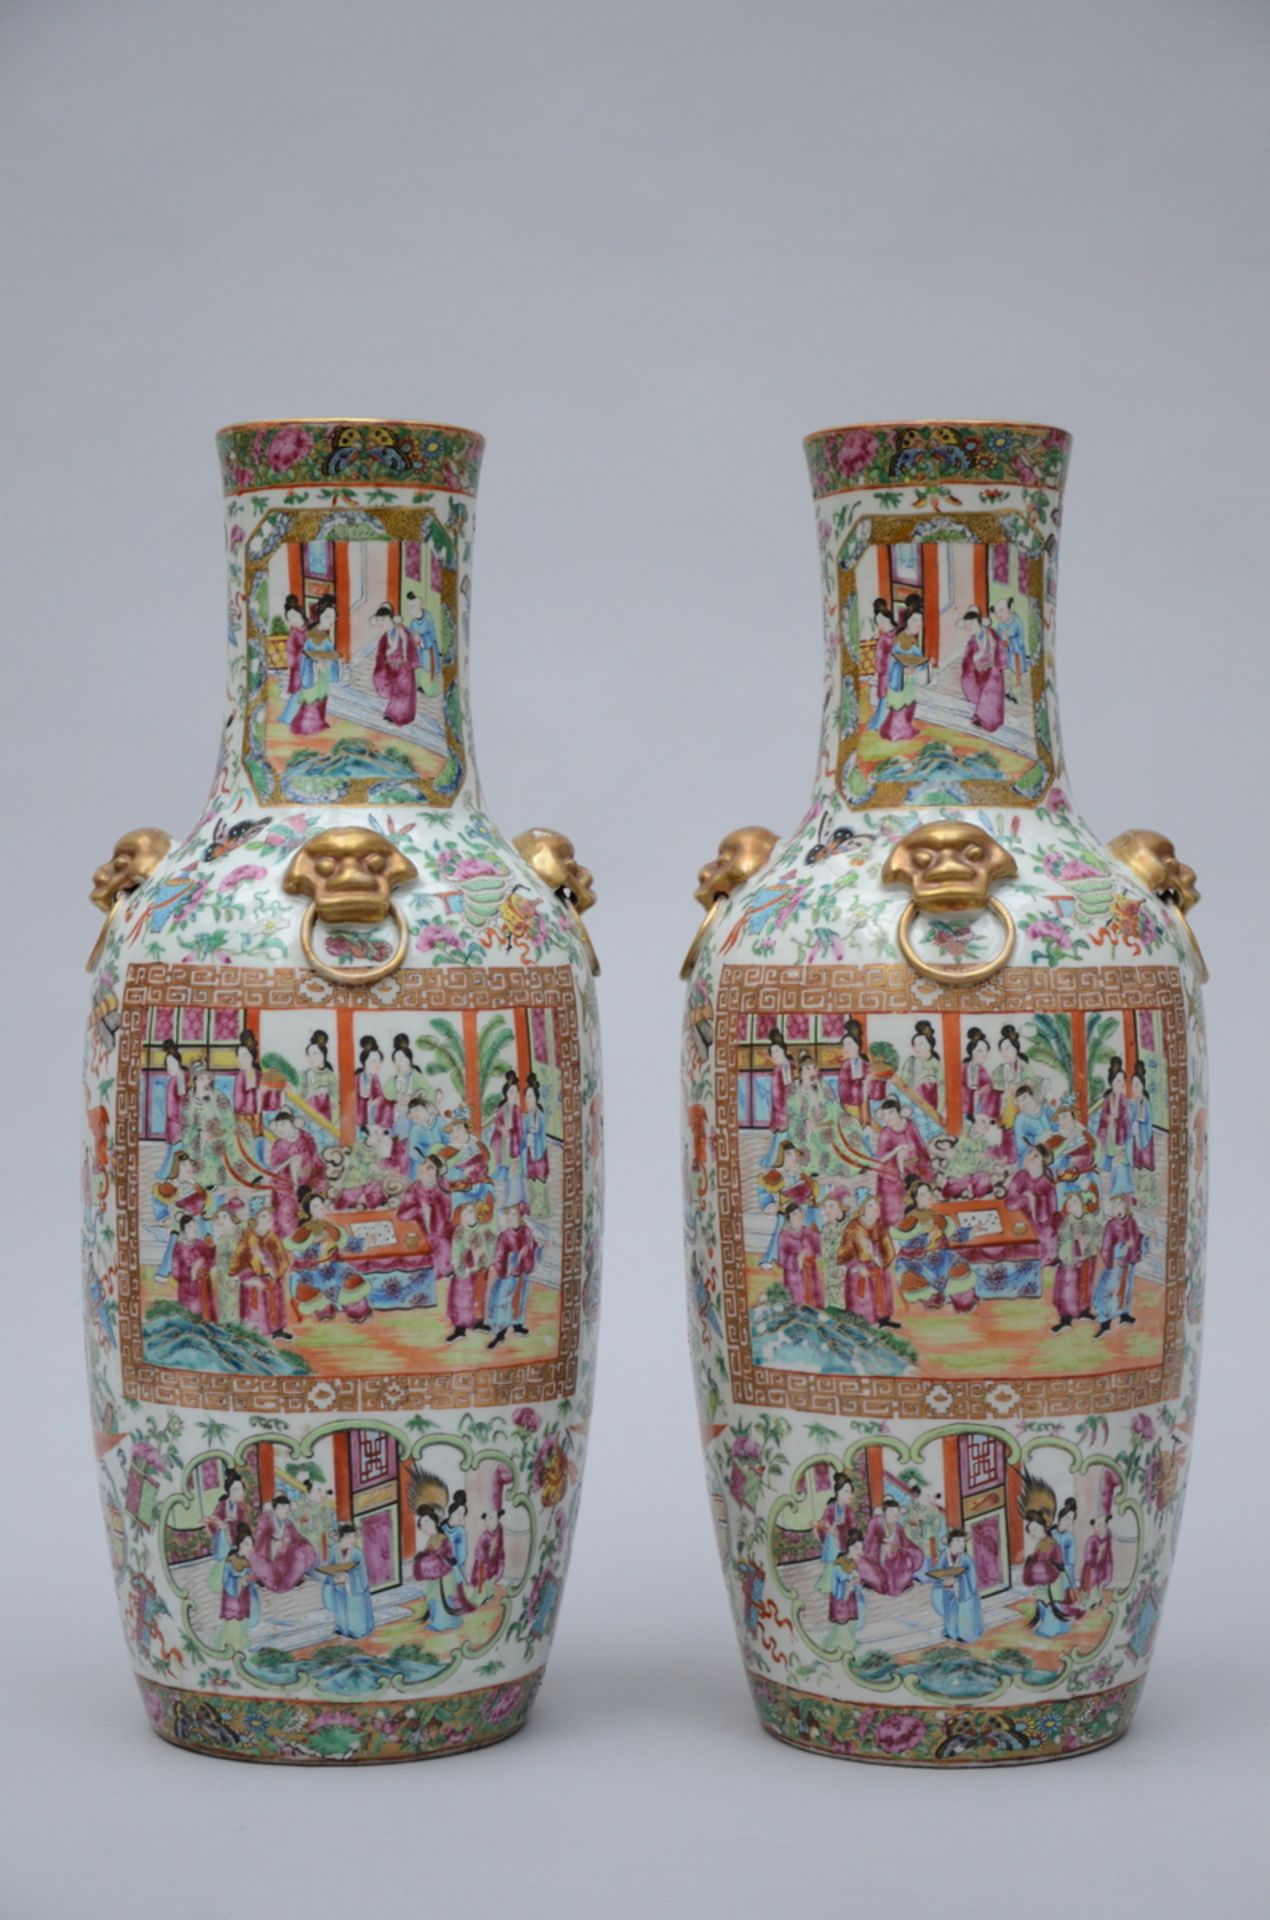 A pair of vases in Chinese porcelain 'gilt Canton', 19th century (62 cm)